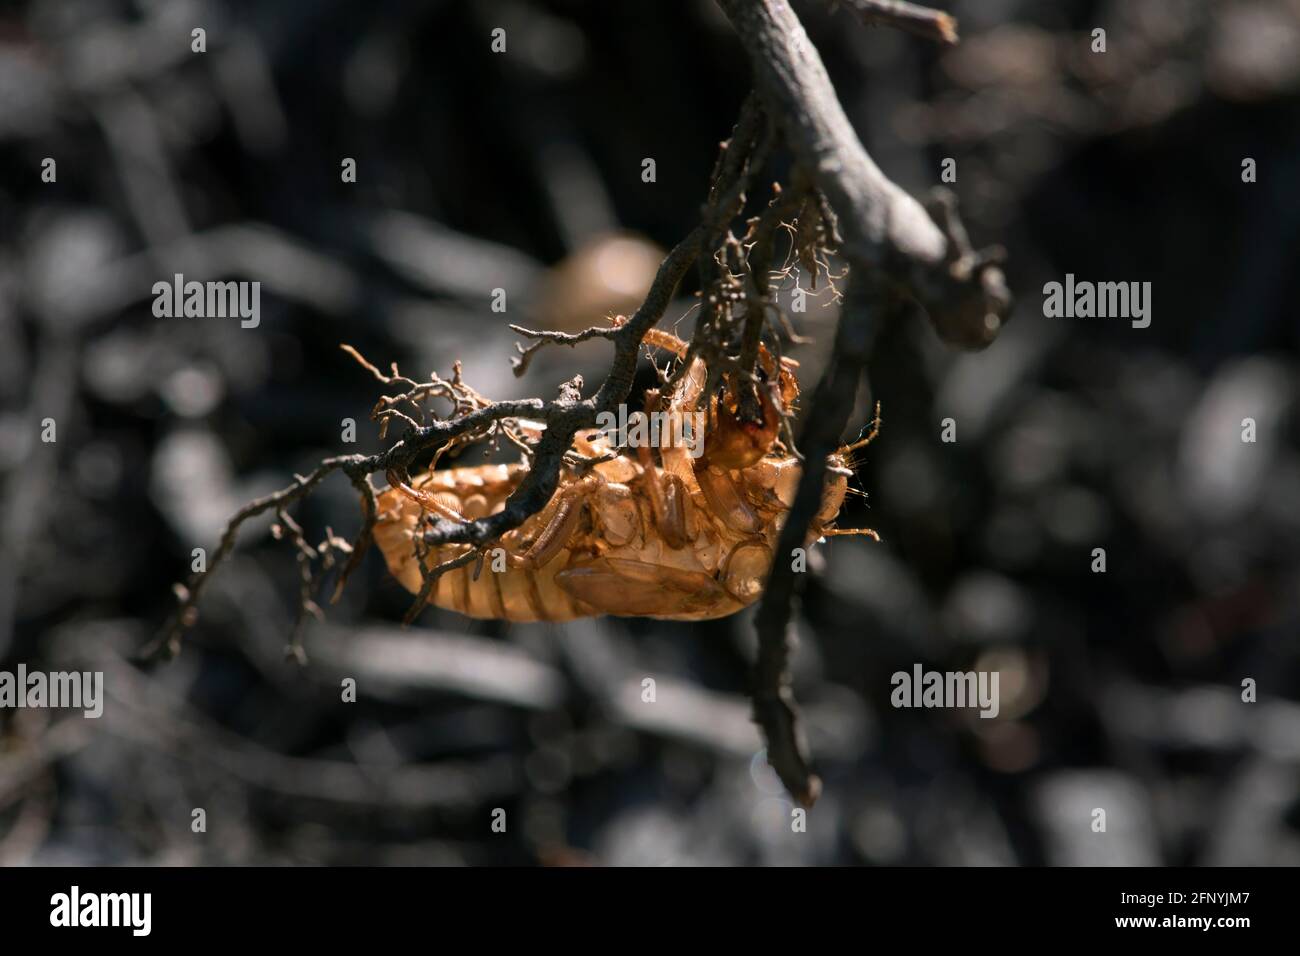 Empty cicada exoskeleton hanging from a branch. Stock Photo